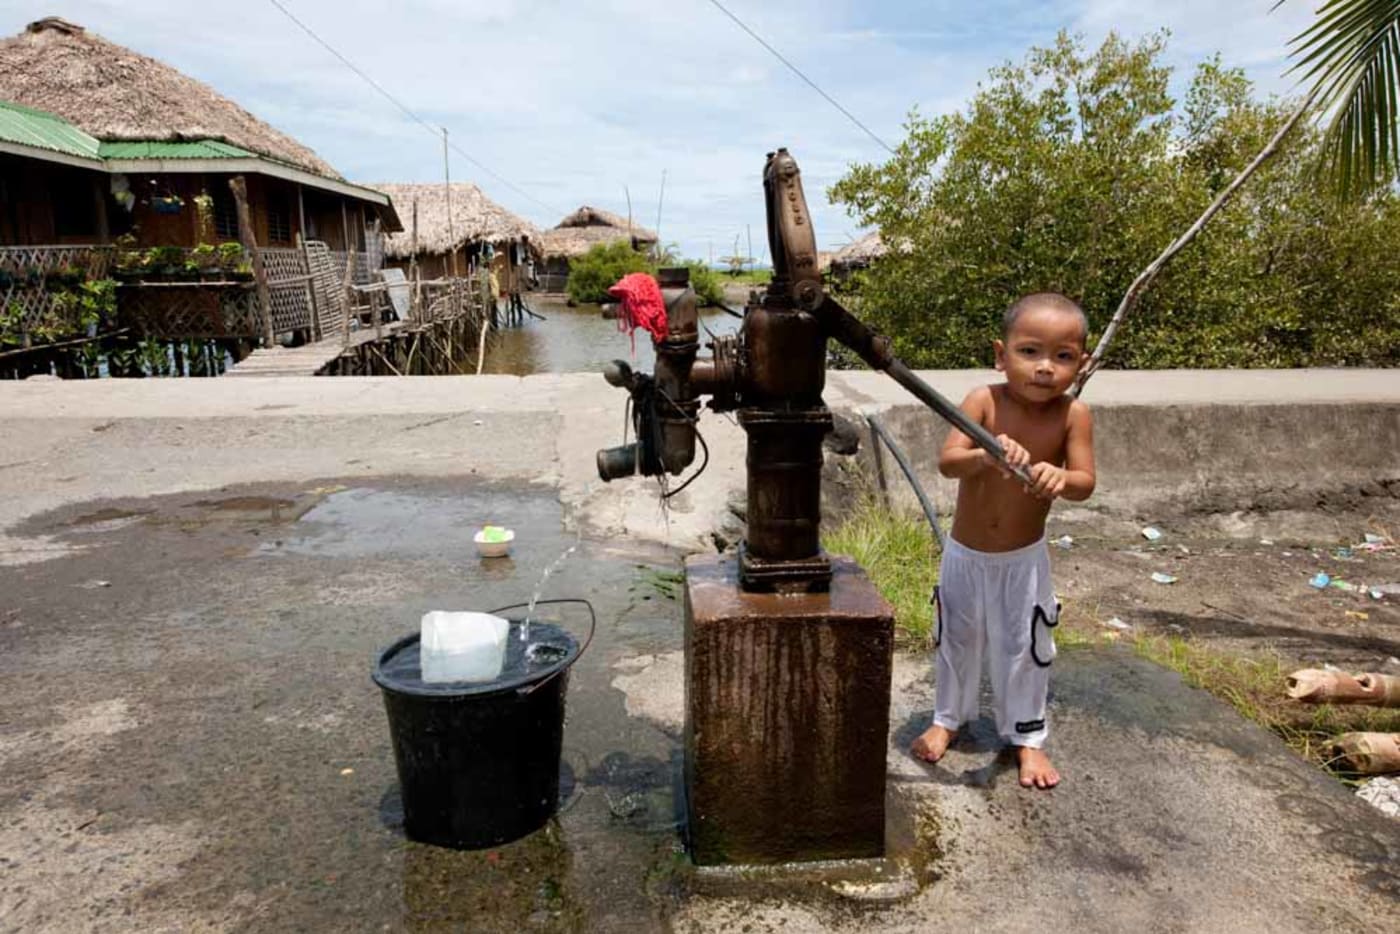 A little boy pumping out water for his bath in Donsol Sorsogon, Bicol, Philippines, May 2009